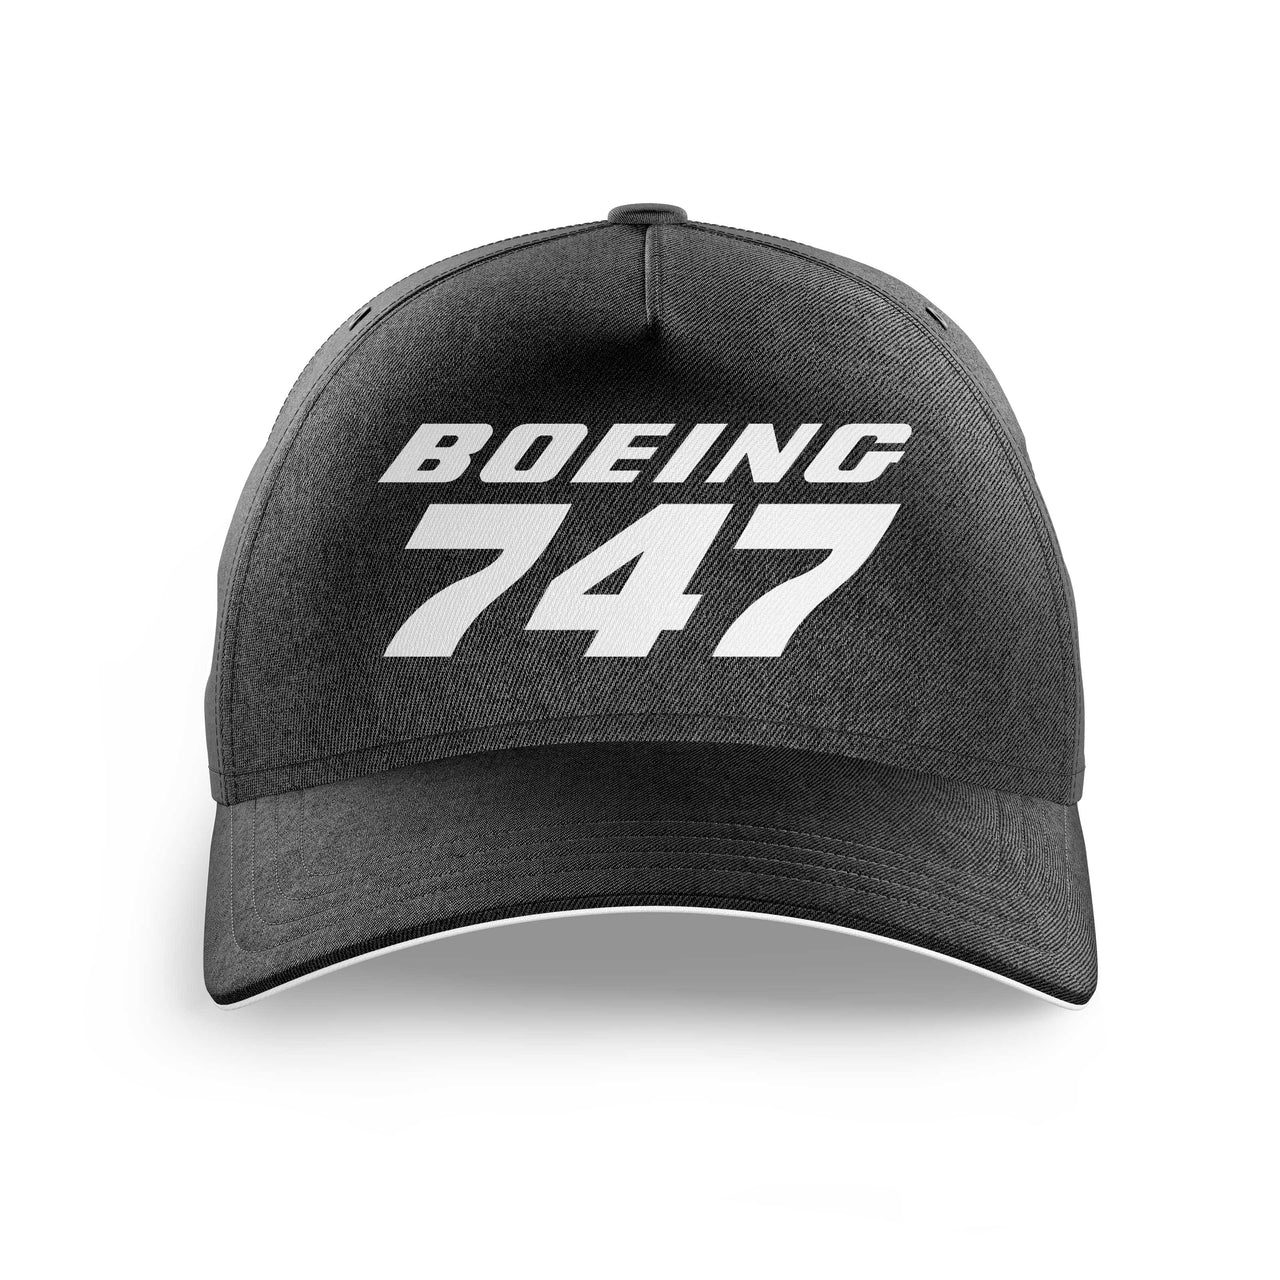 Boeing 747 & Text Printed Hats